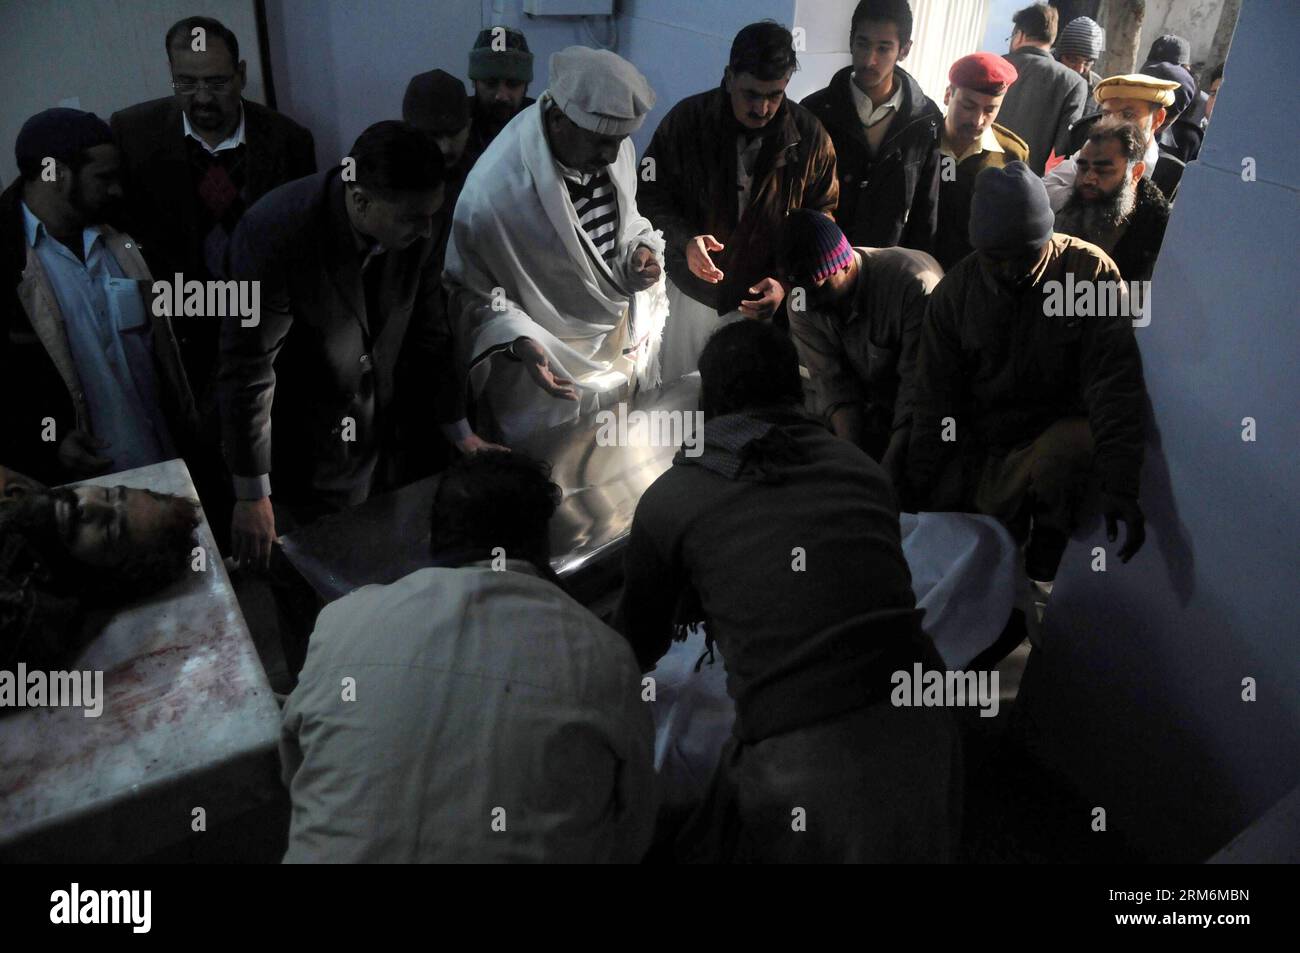 (140120) -- RAWALPINDI, Jan. 20, 2014 (Xinhua) -- People transfer a body of a victim to a hospital in Rawalpindi, adjacent city of Islamabad, capital of Pakistan, Jan. 20, 2014. At least 13 people were killed and over 20 others injured when a suicide bomber blew himself up near a police check post jointly owned by police and Pakistani army in Rawalpindi on Monday morning, officials said. (Xinhua/Ahmad Kamal) PAKISTAN-RAWALPINDI-SUICIDE-ATTACK PUBLICATIONxNOTxINxCHN   Rawalpindi Jan 20 2014 XINHUA Celebrities Transfer a Body of a Victim to a Hospital in Rawalpindi adjacent City of Islamabad Cap Stock Photo